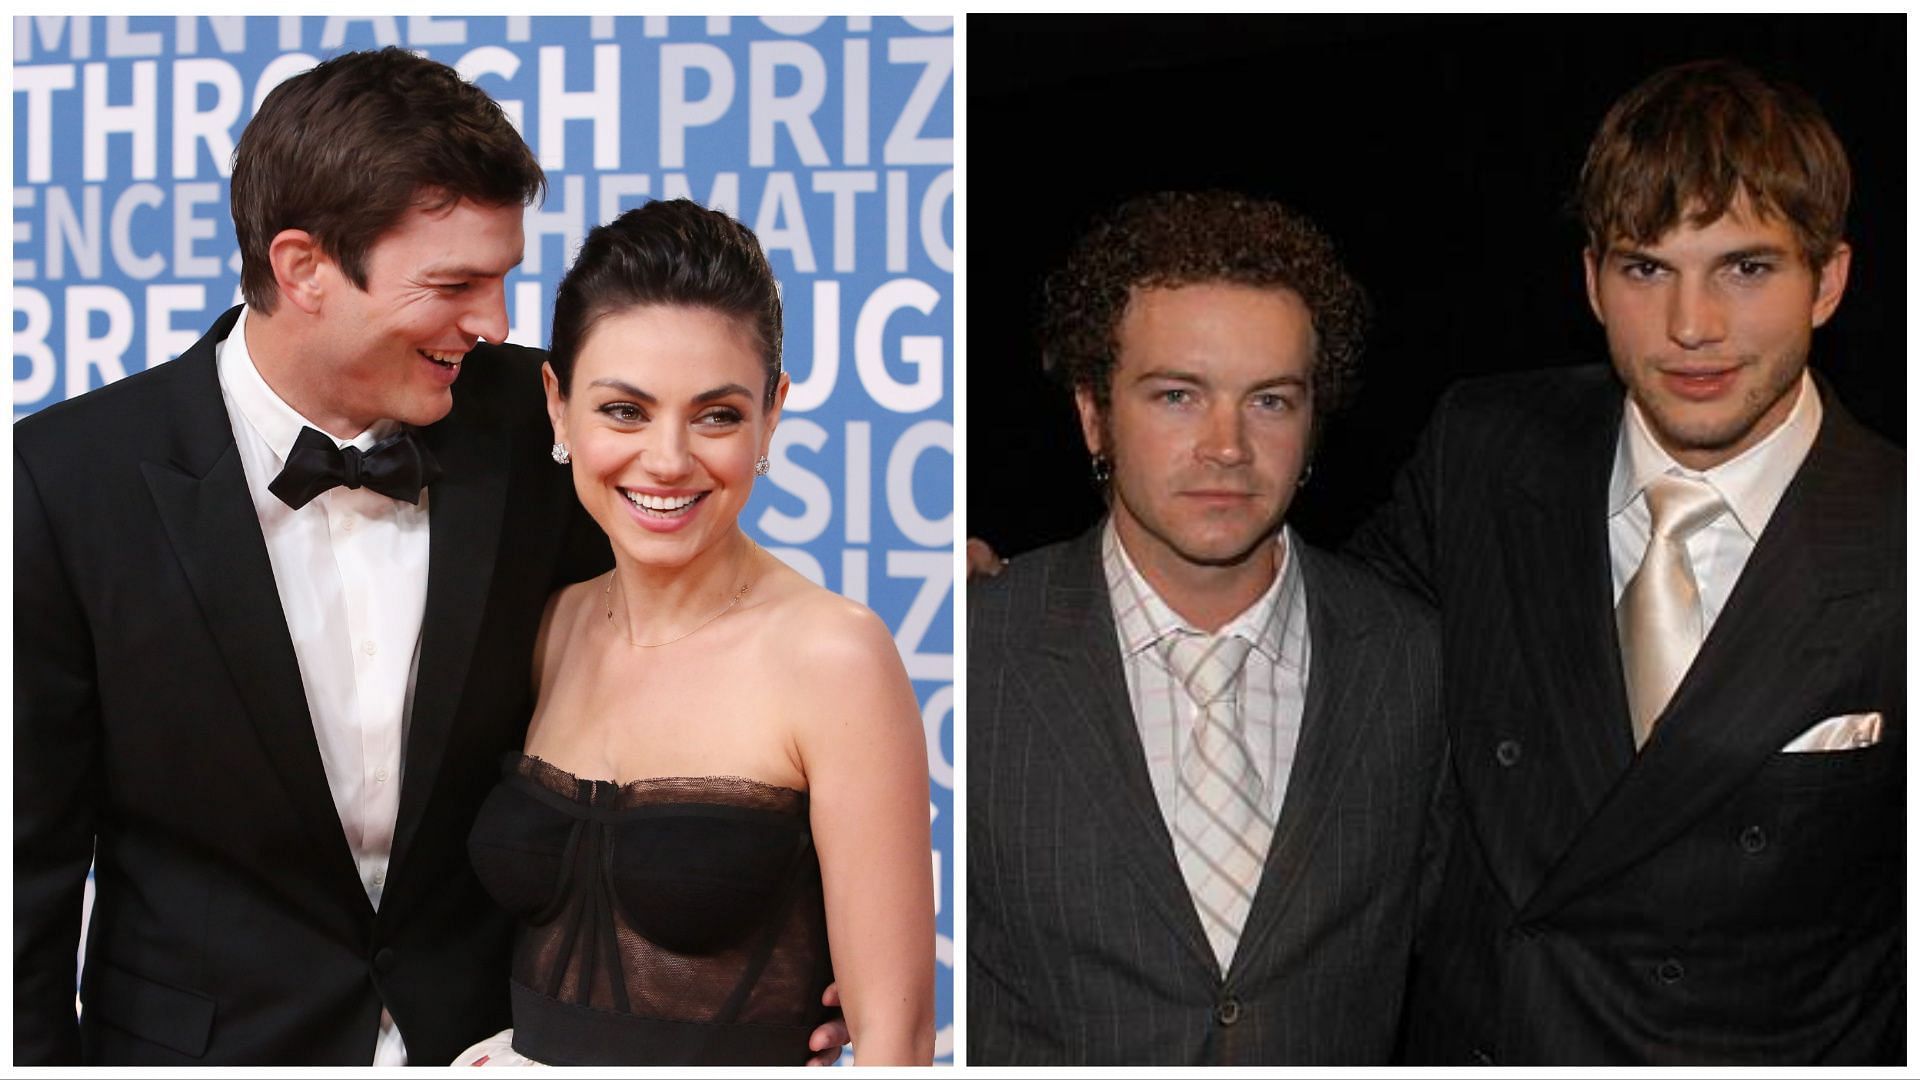 Kutcher faces backlash for supporting Danny Masterson (Image via Getty Images)